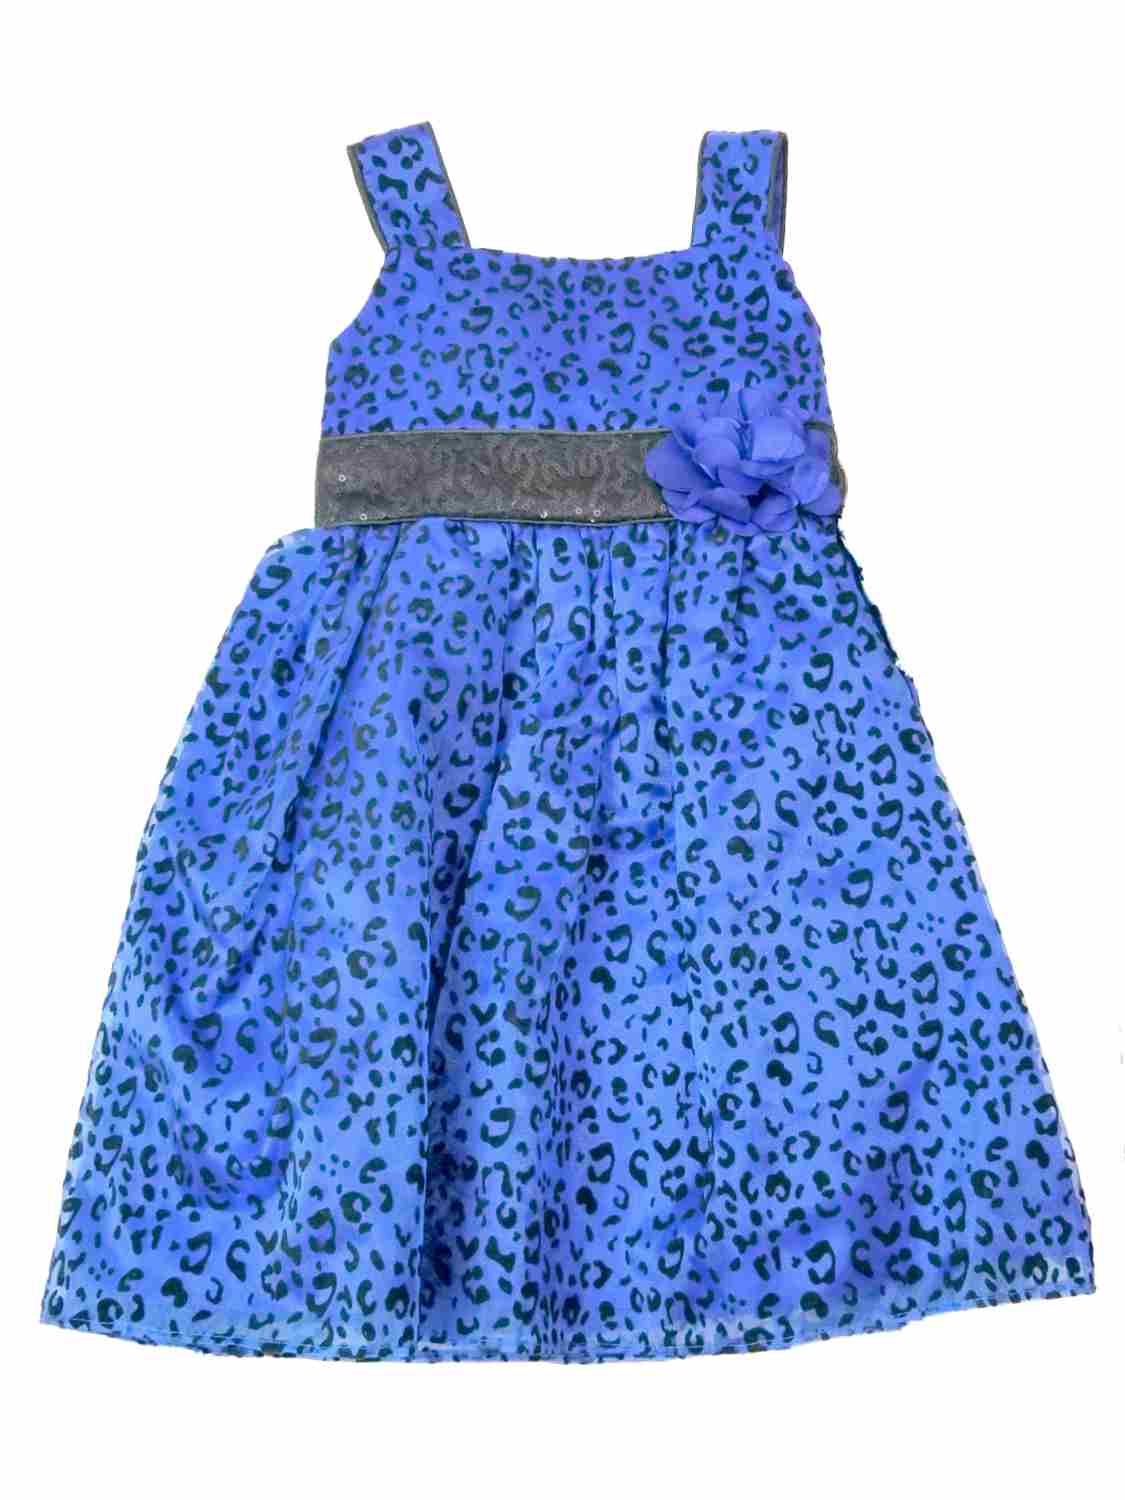 Youngland Infant Toddler Girls Blue Leopard Print Fancy Christmas Holiday Party Dress 3T